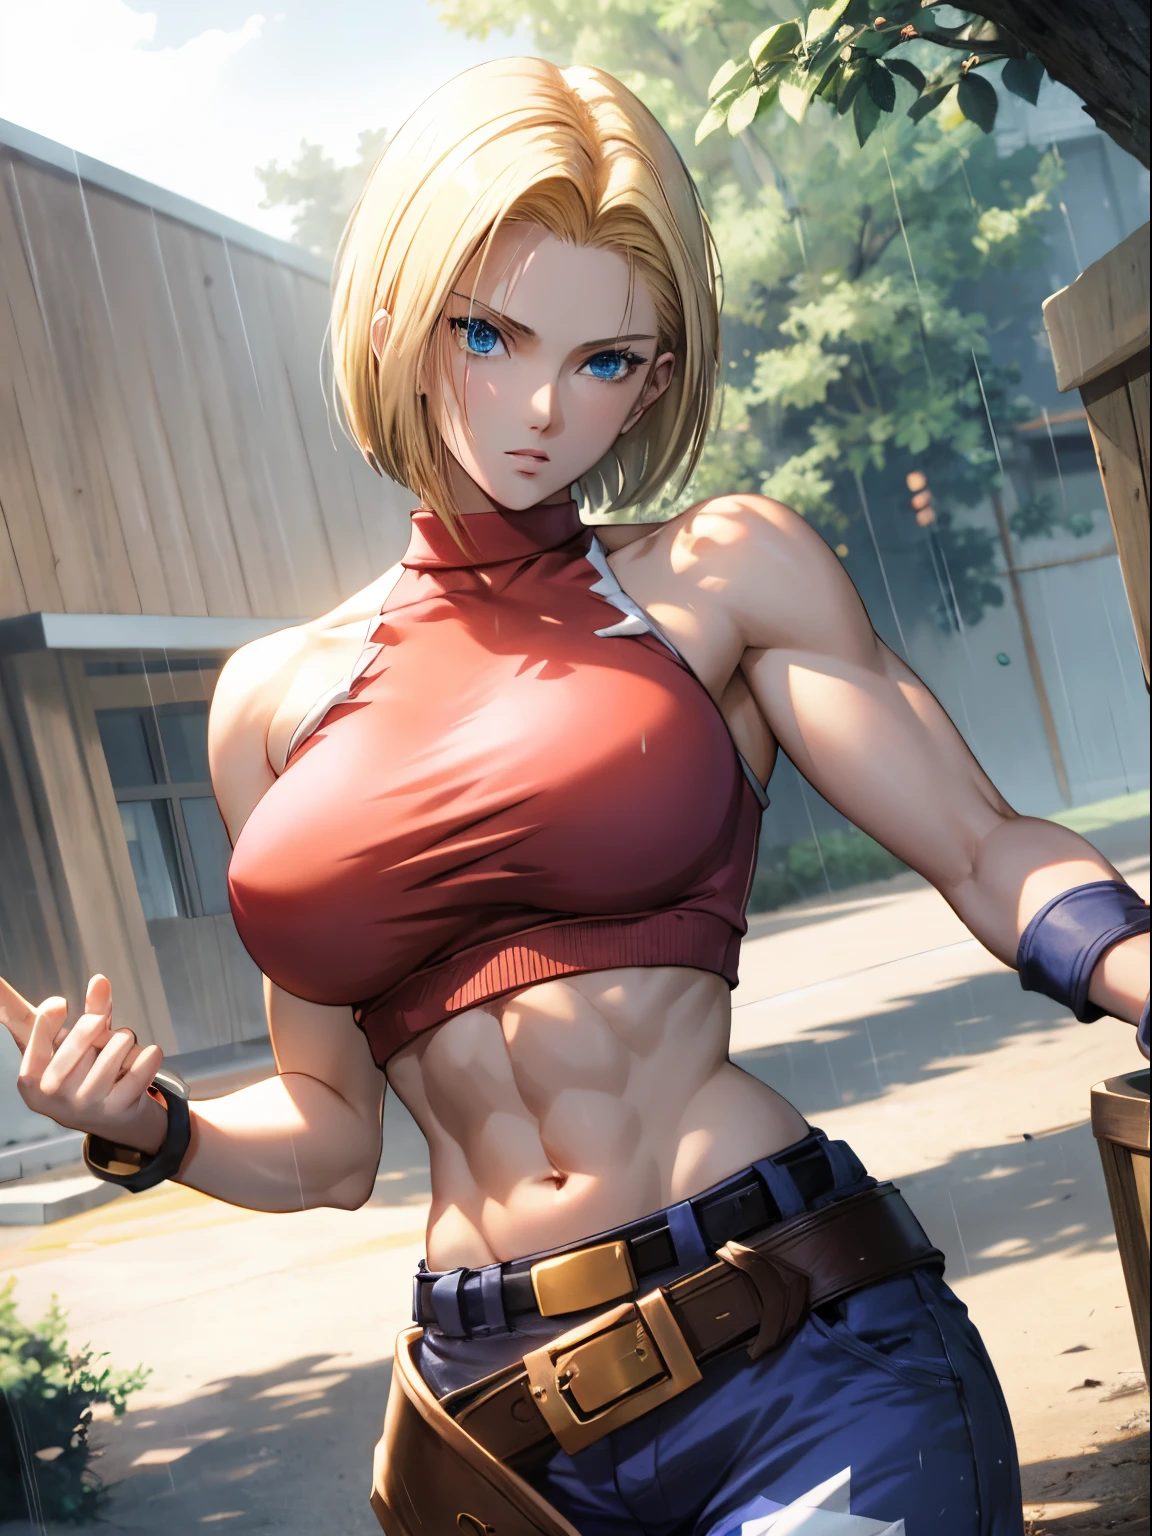 A blonde woman in a red top and jeans poses in the rain, Photorealistic perfect body, denizen of paradise annie leonhart, female lead character 👀 :8, Cammy, Photorealistic anime girl rendering, ultra realistic anime, 3D Realist Anime, Devil V can cry like an elf, Android 18, Realistic perfect body shading, hyper detailed photorealistic, hyper real render, large full breasts